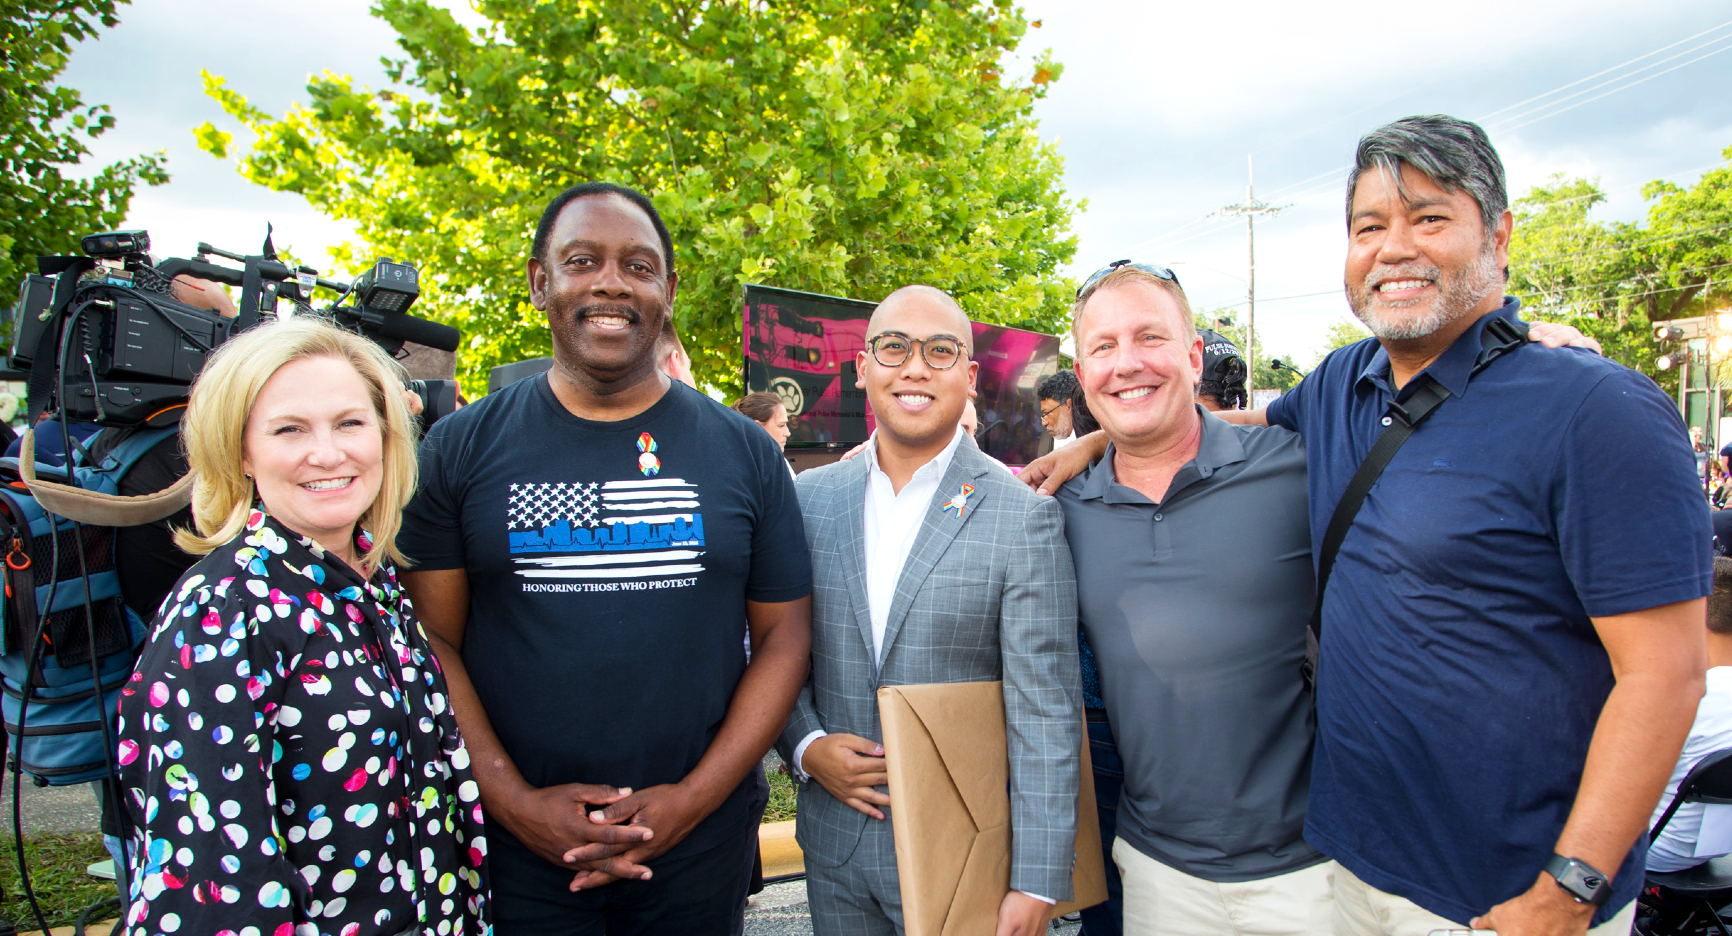 (L to R) Visit Orlando President & CEO Casandra Matej joins Mayor Jerry Demings, Special Assistant to the Mayor Marc Espeso, Deputy County Administrator Darren Gray, and Orlando resident Greg Broner at the June 12 5-Year Pulse Remembrance Ceremony.